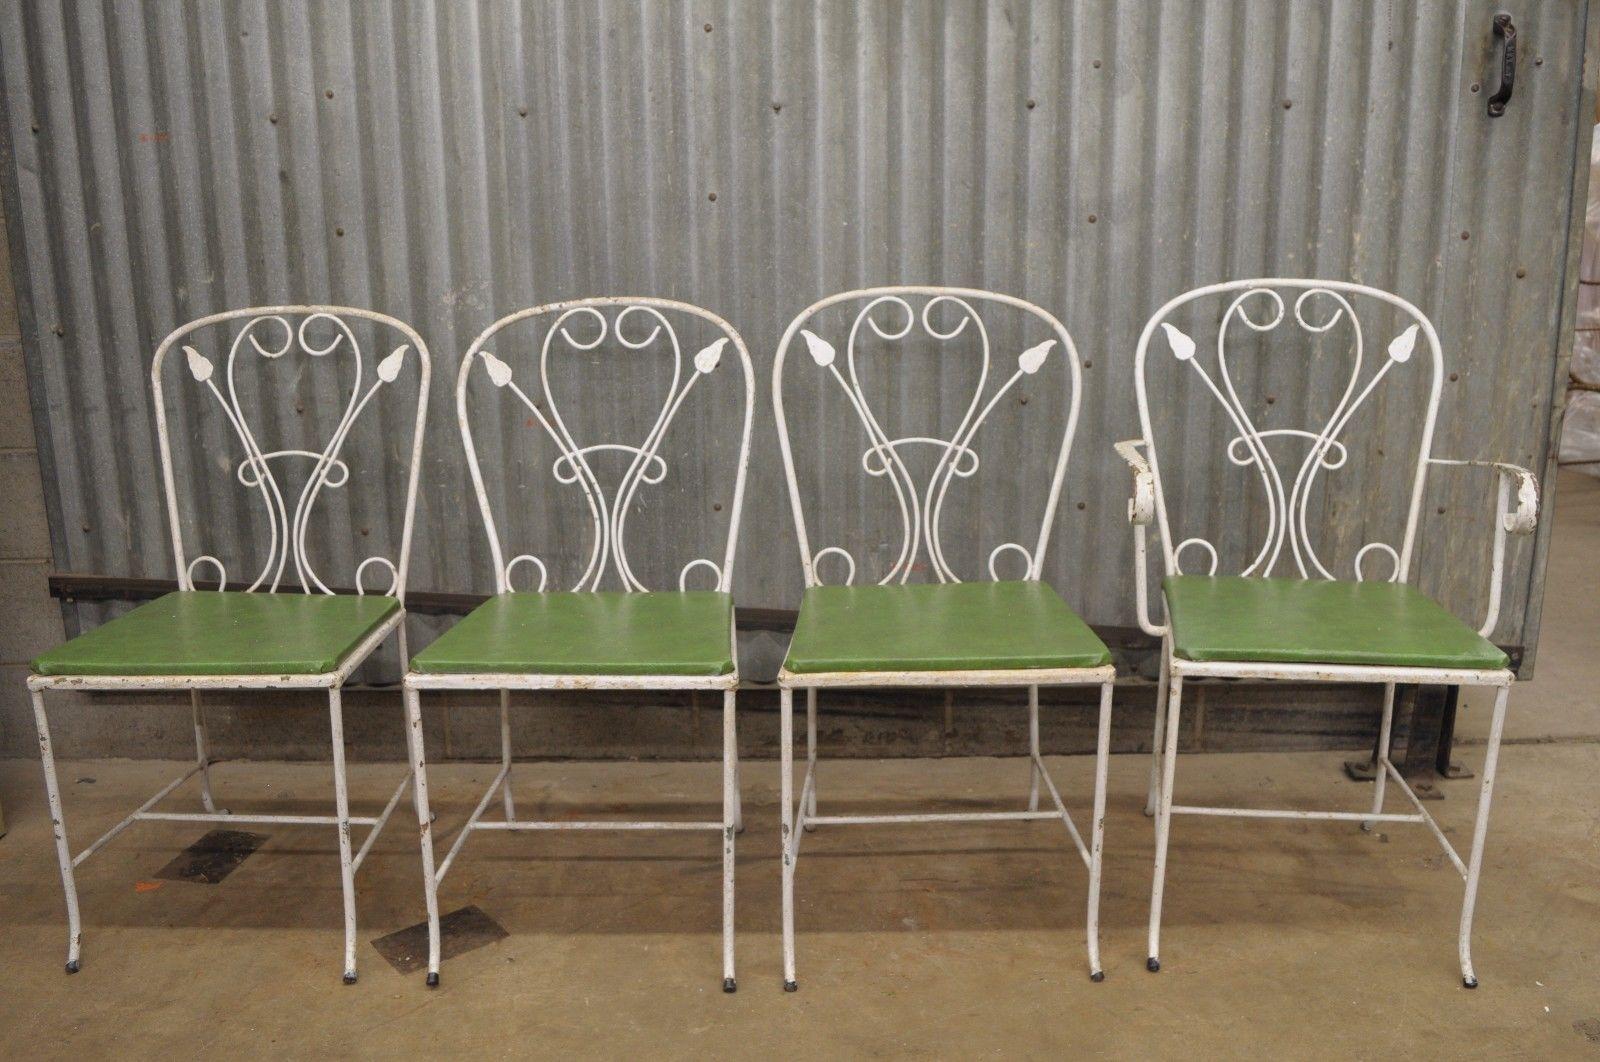 Vintage Salterini 5-piece wrought iron patio dining set, midcentury / Art Nouveau. Listing includes unique narrow rectangular table with glass top and stretcher base, 4 chairs (3 side chairs and 1 armchair), scrolling leaf / arrow pattern, wrought